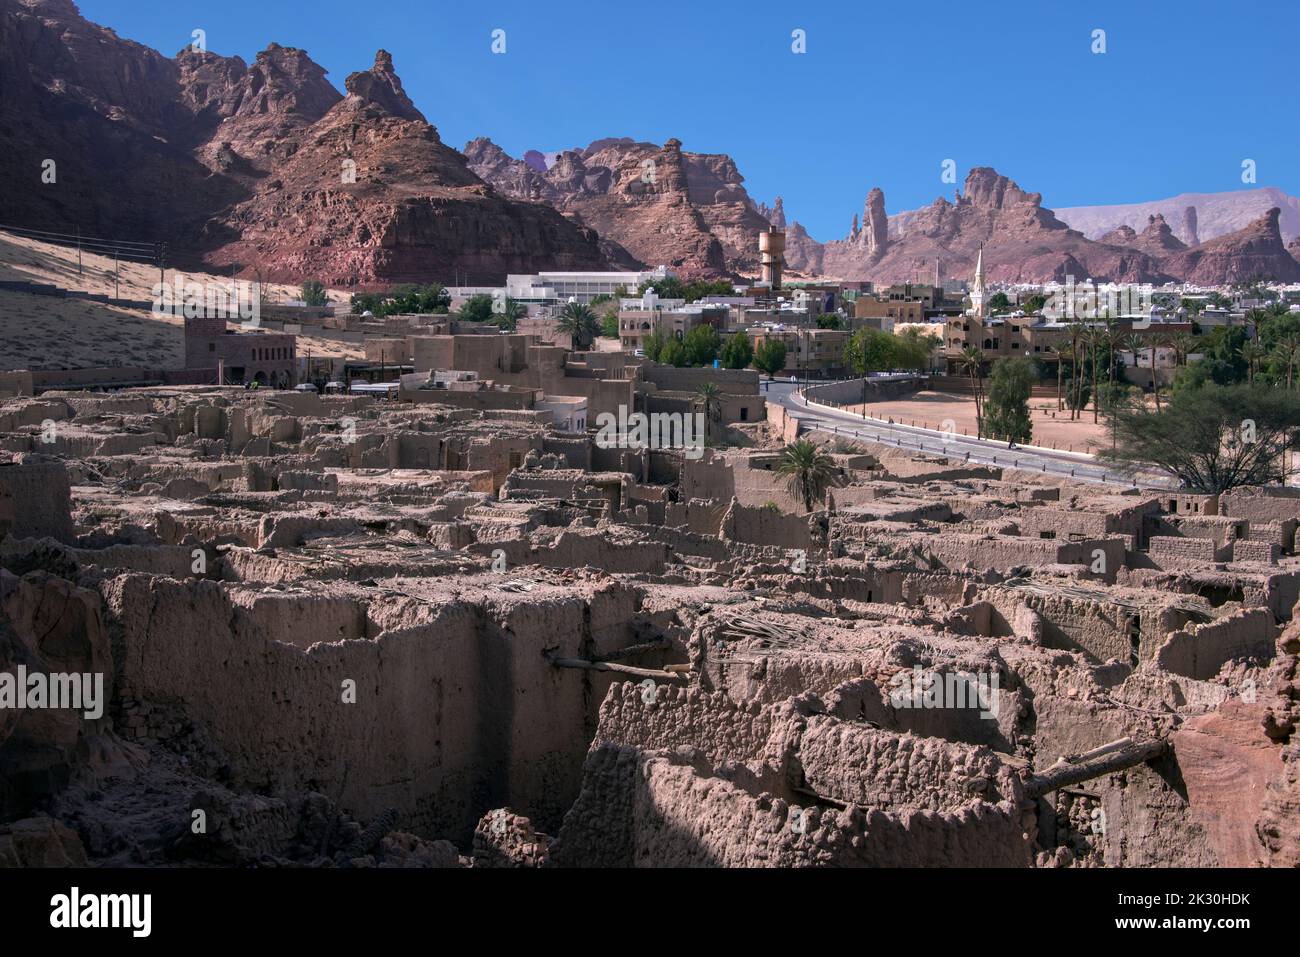 View of old town and New Town Al Ula Saudia Arabia Stock Photo